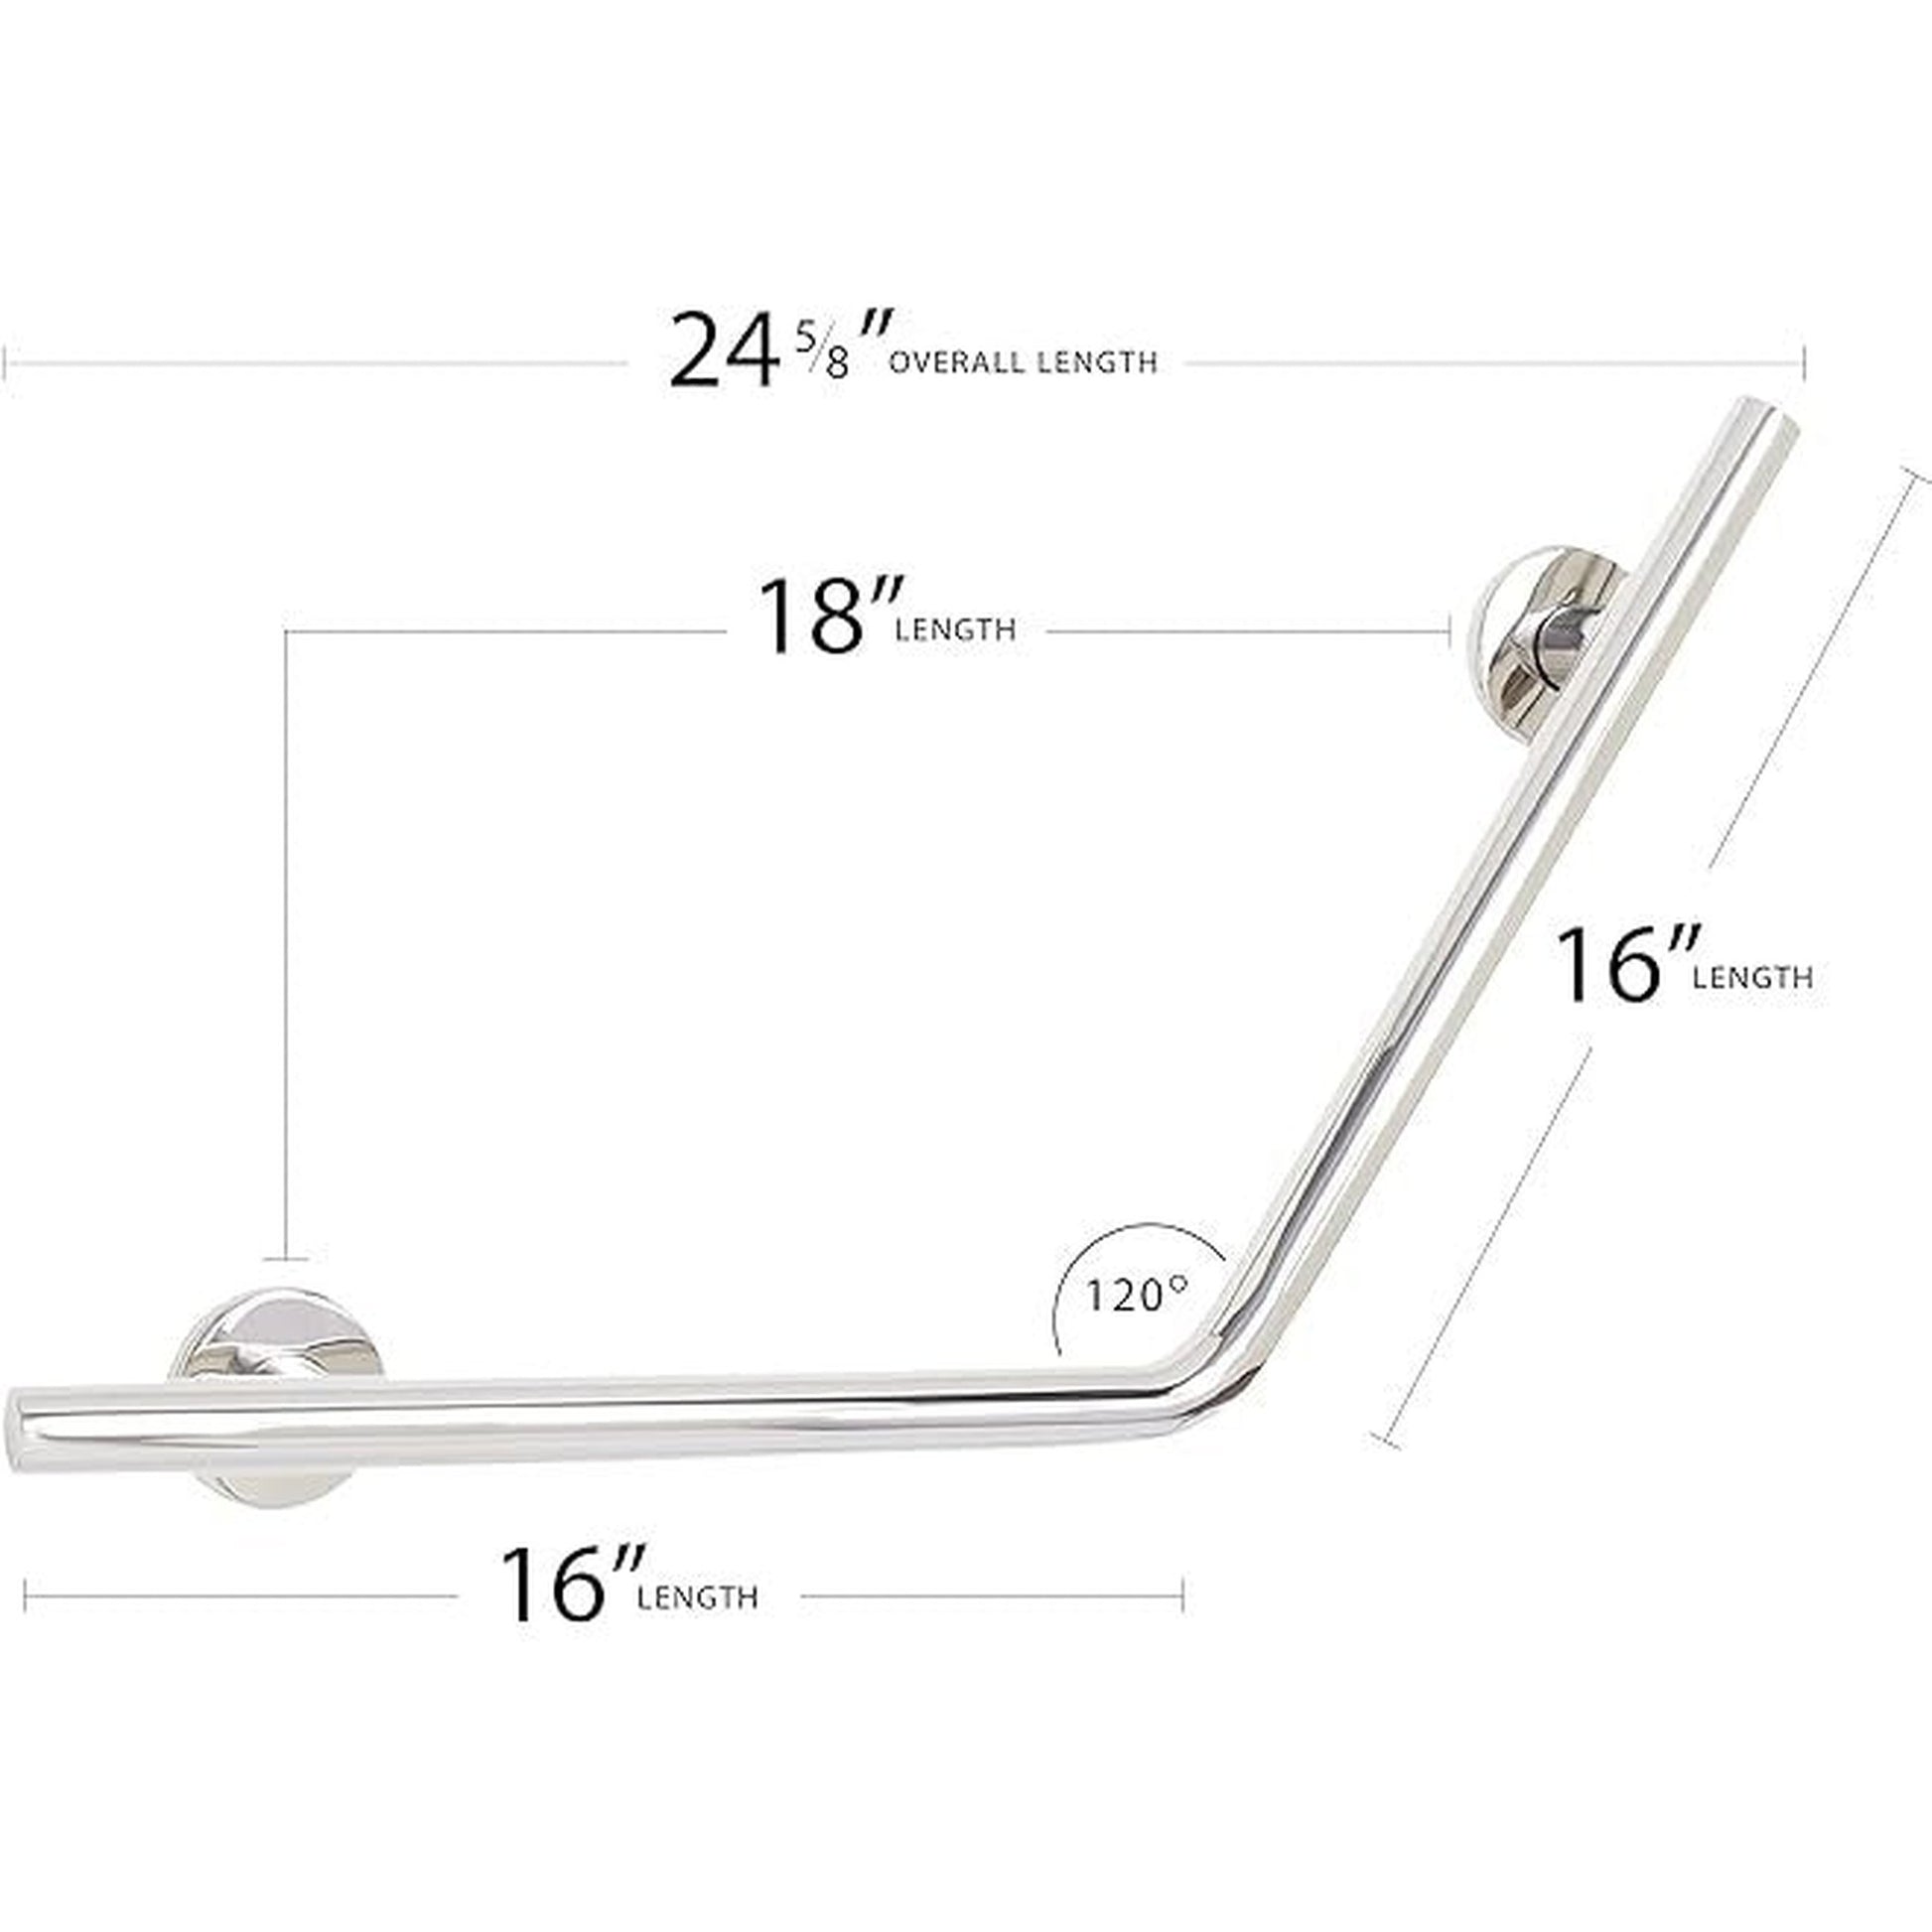 Seachrome Lifestyle & Wellness 16" x 16" Polished Stainless Steel 1.25 Diameter Concealed Flange Wedge Angled Grab Bar